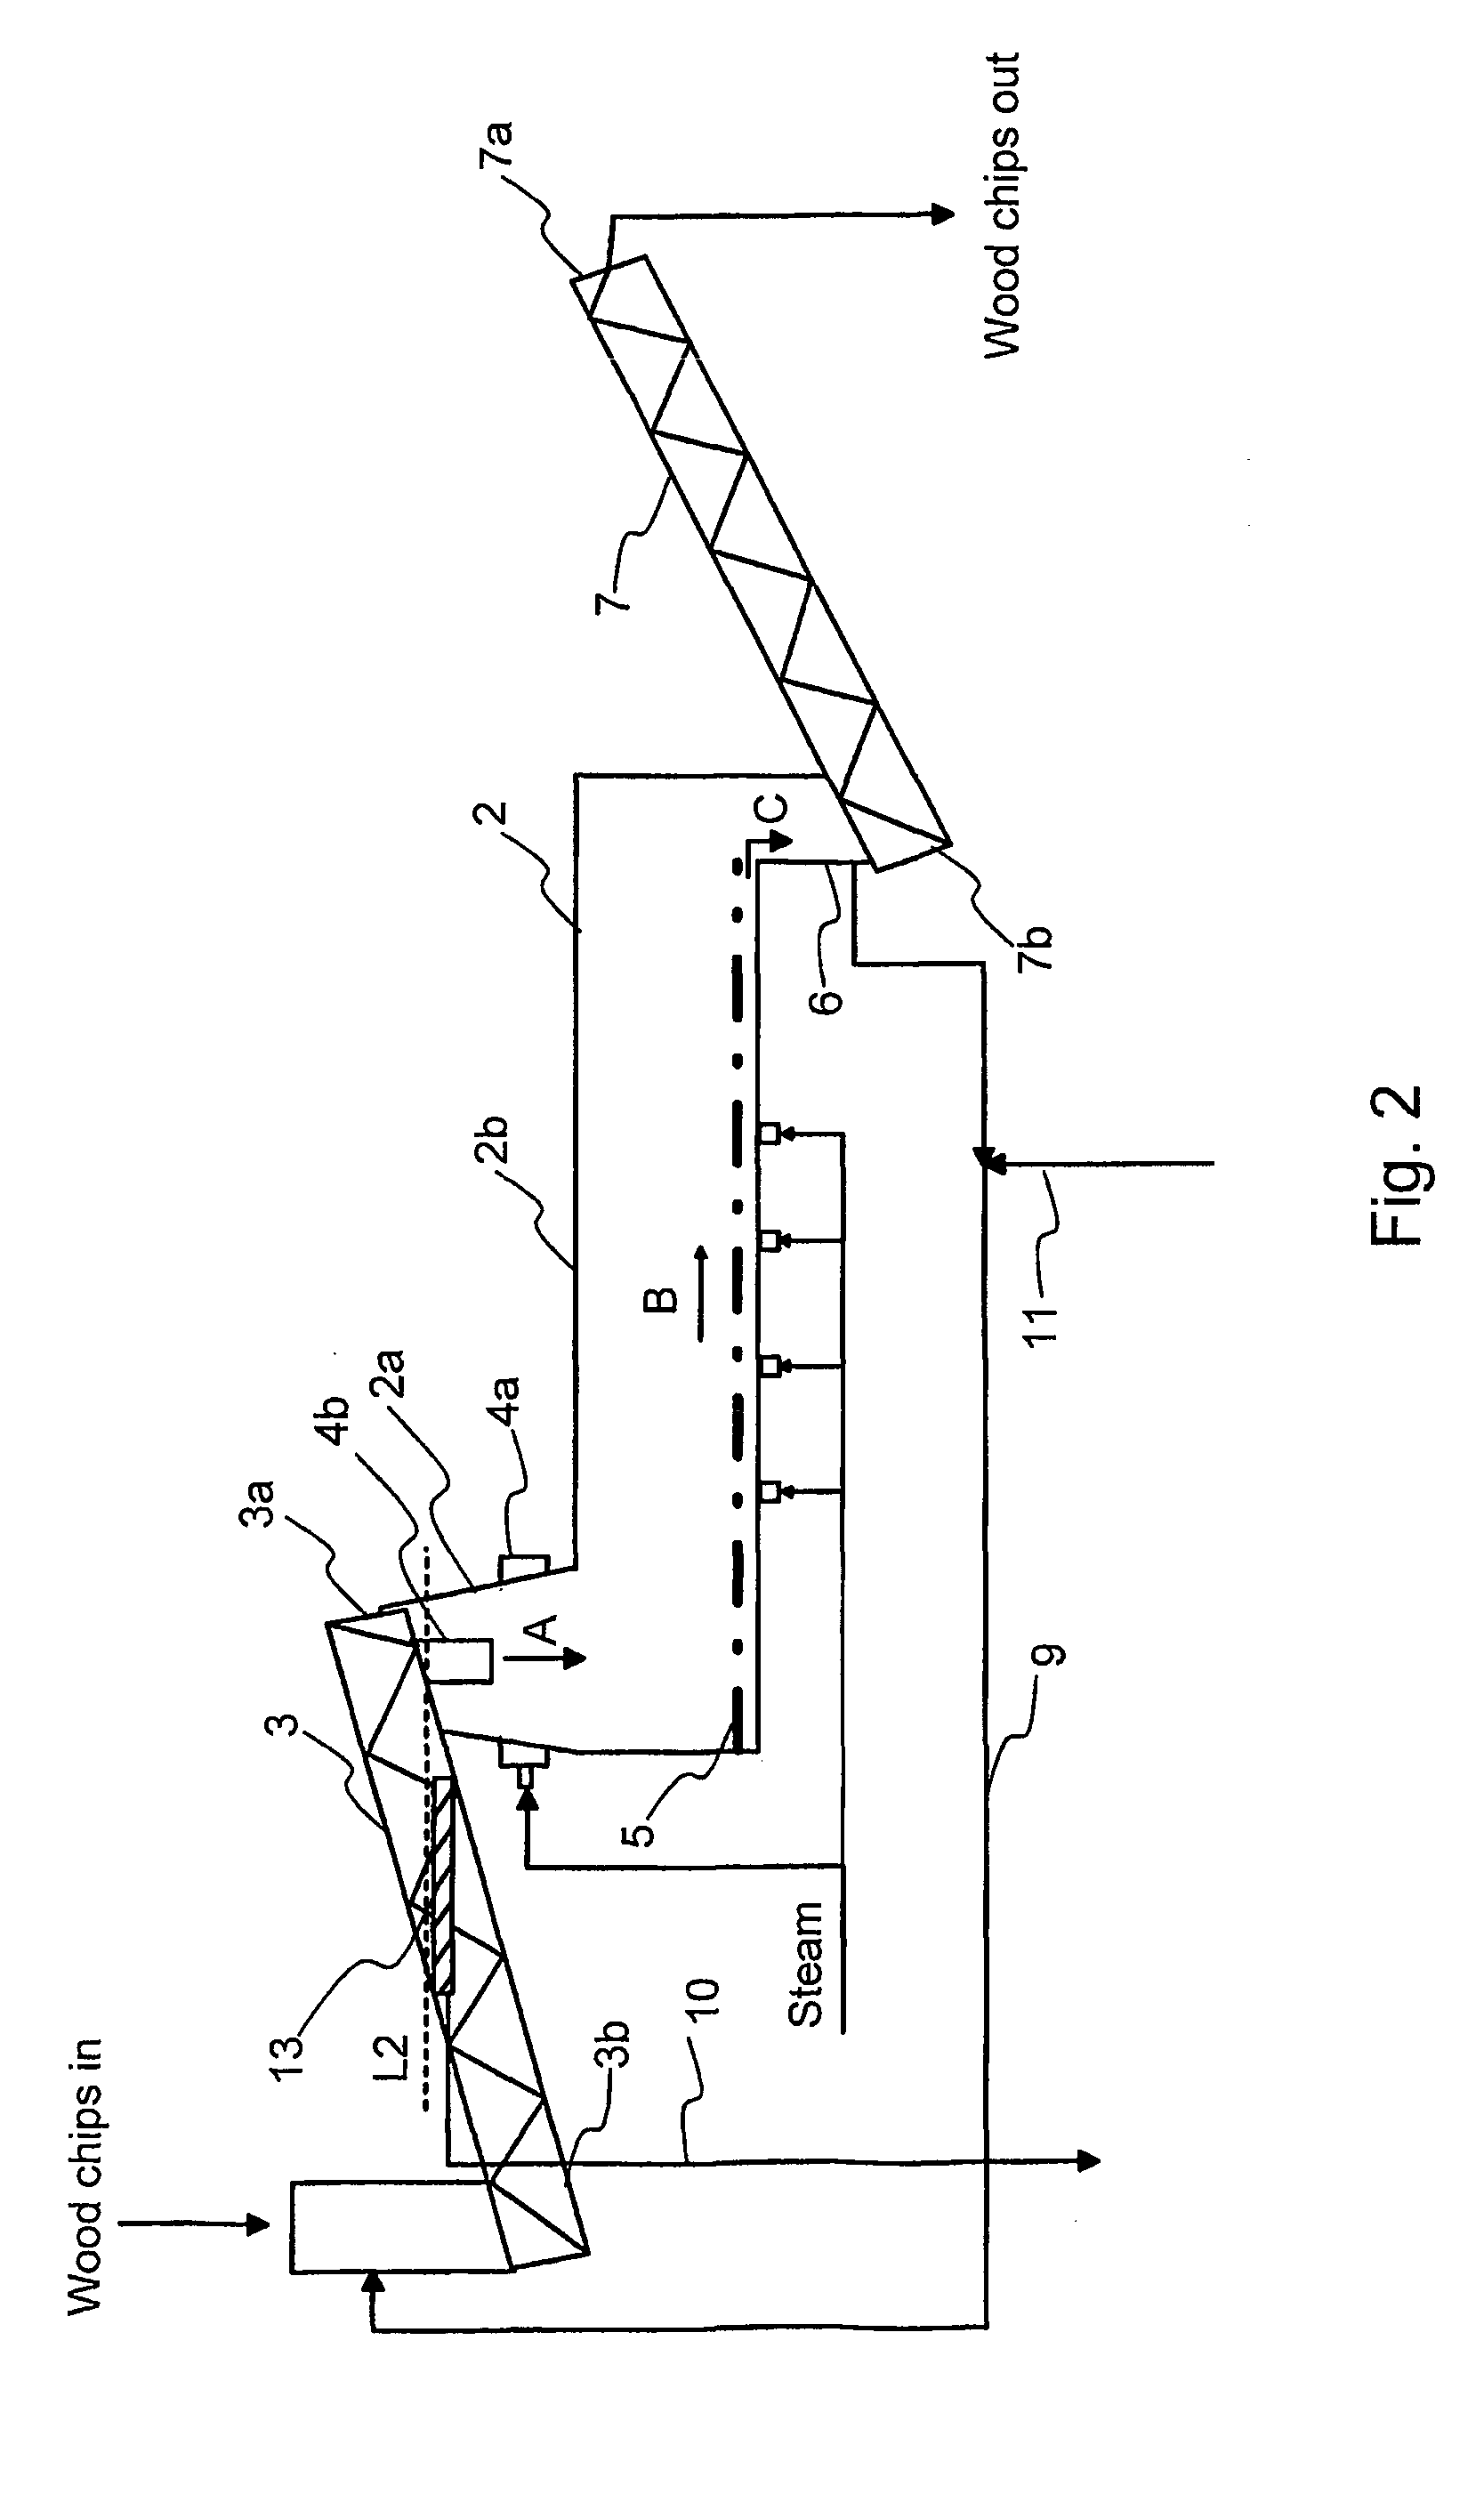 Method and Apparatus for Processing Wood Chips